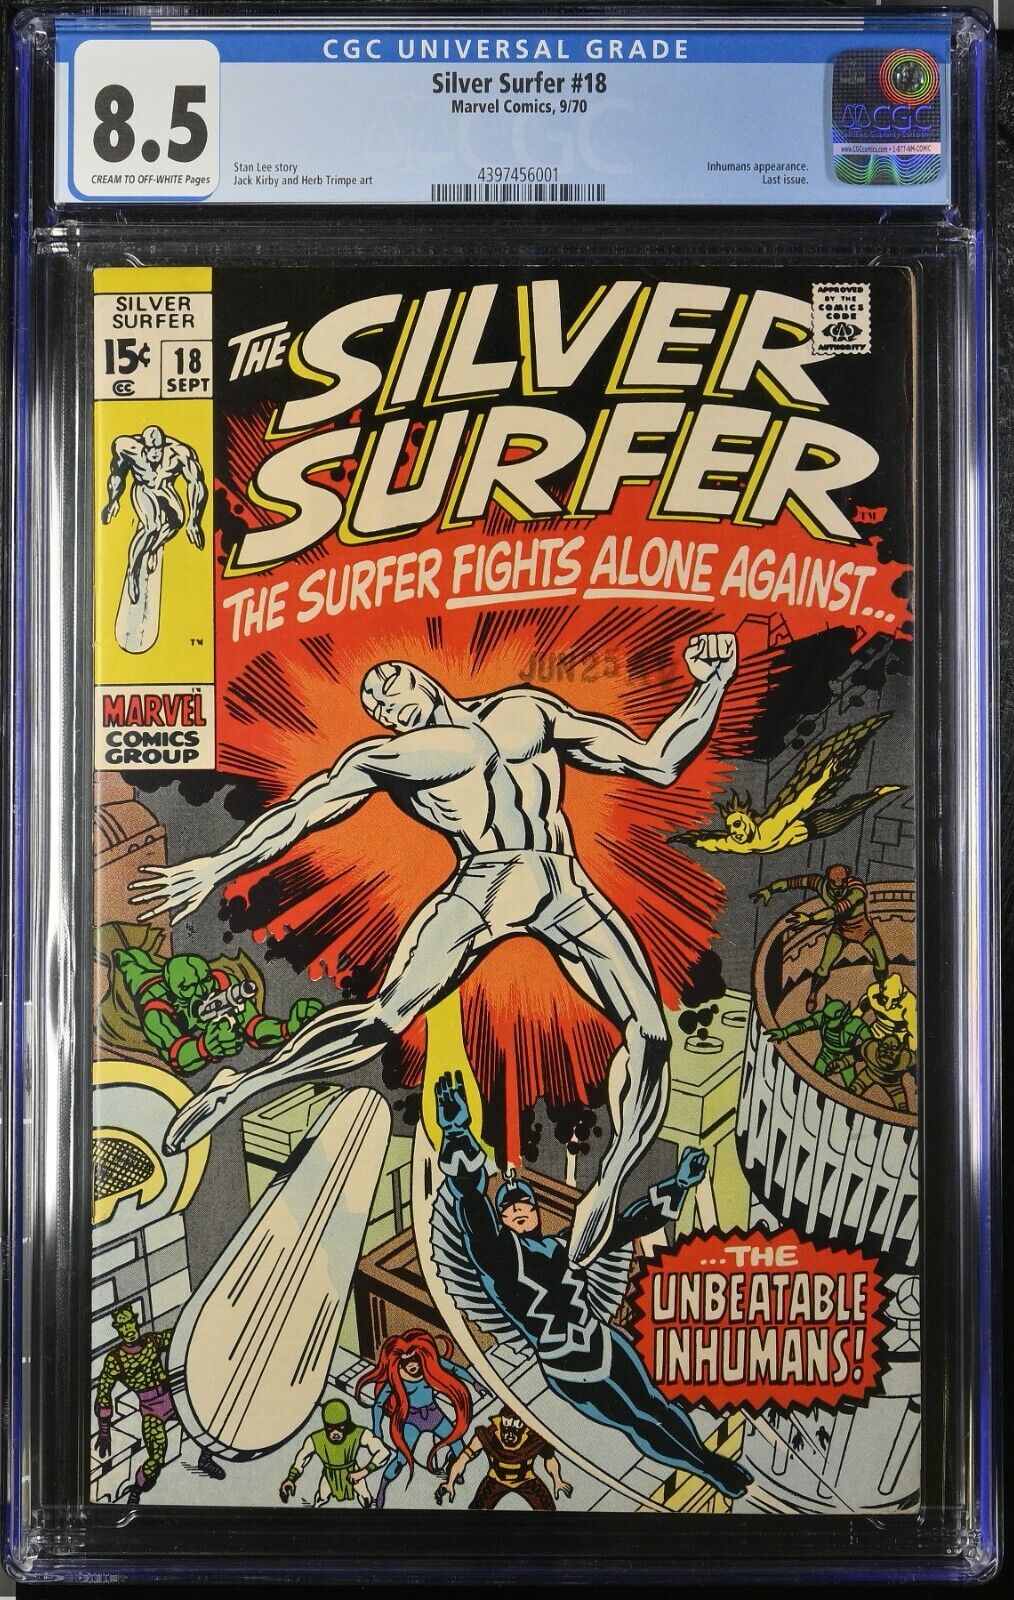 SILVER SURFER #18 (1970) CGC 8.5 FINAL ISSUE MARVEL COMICS